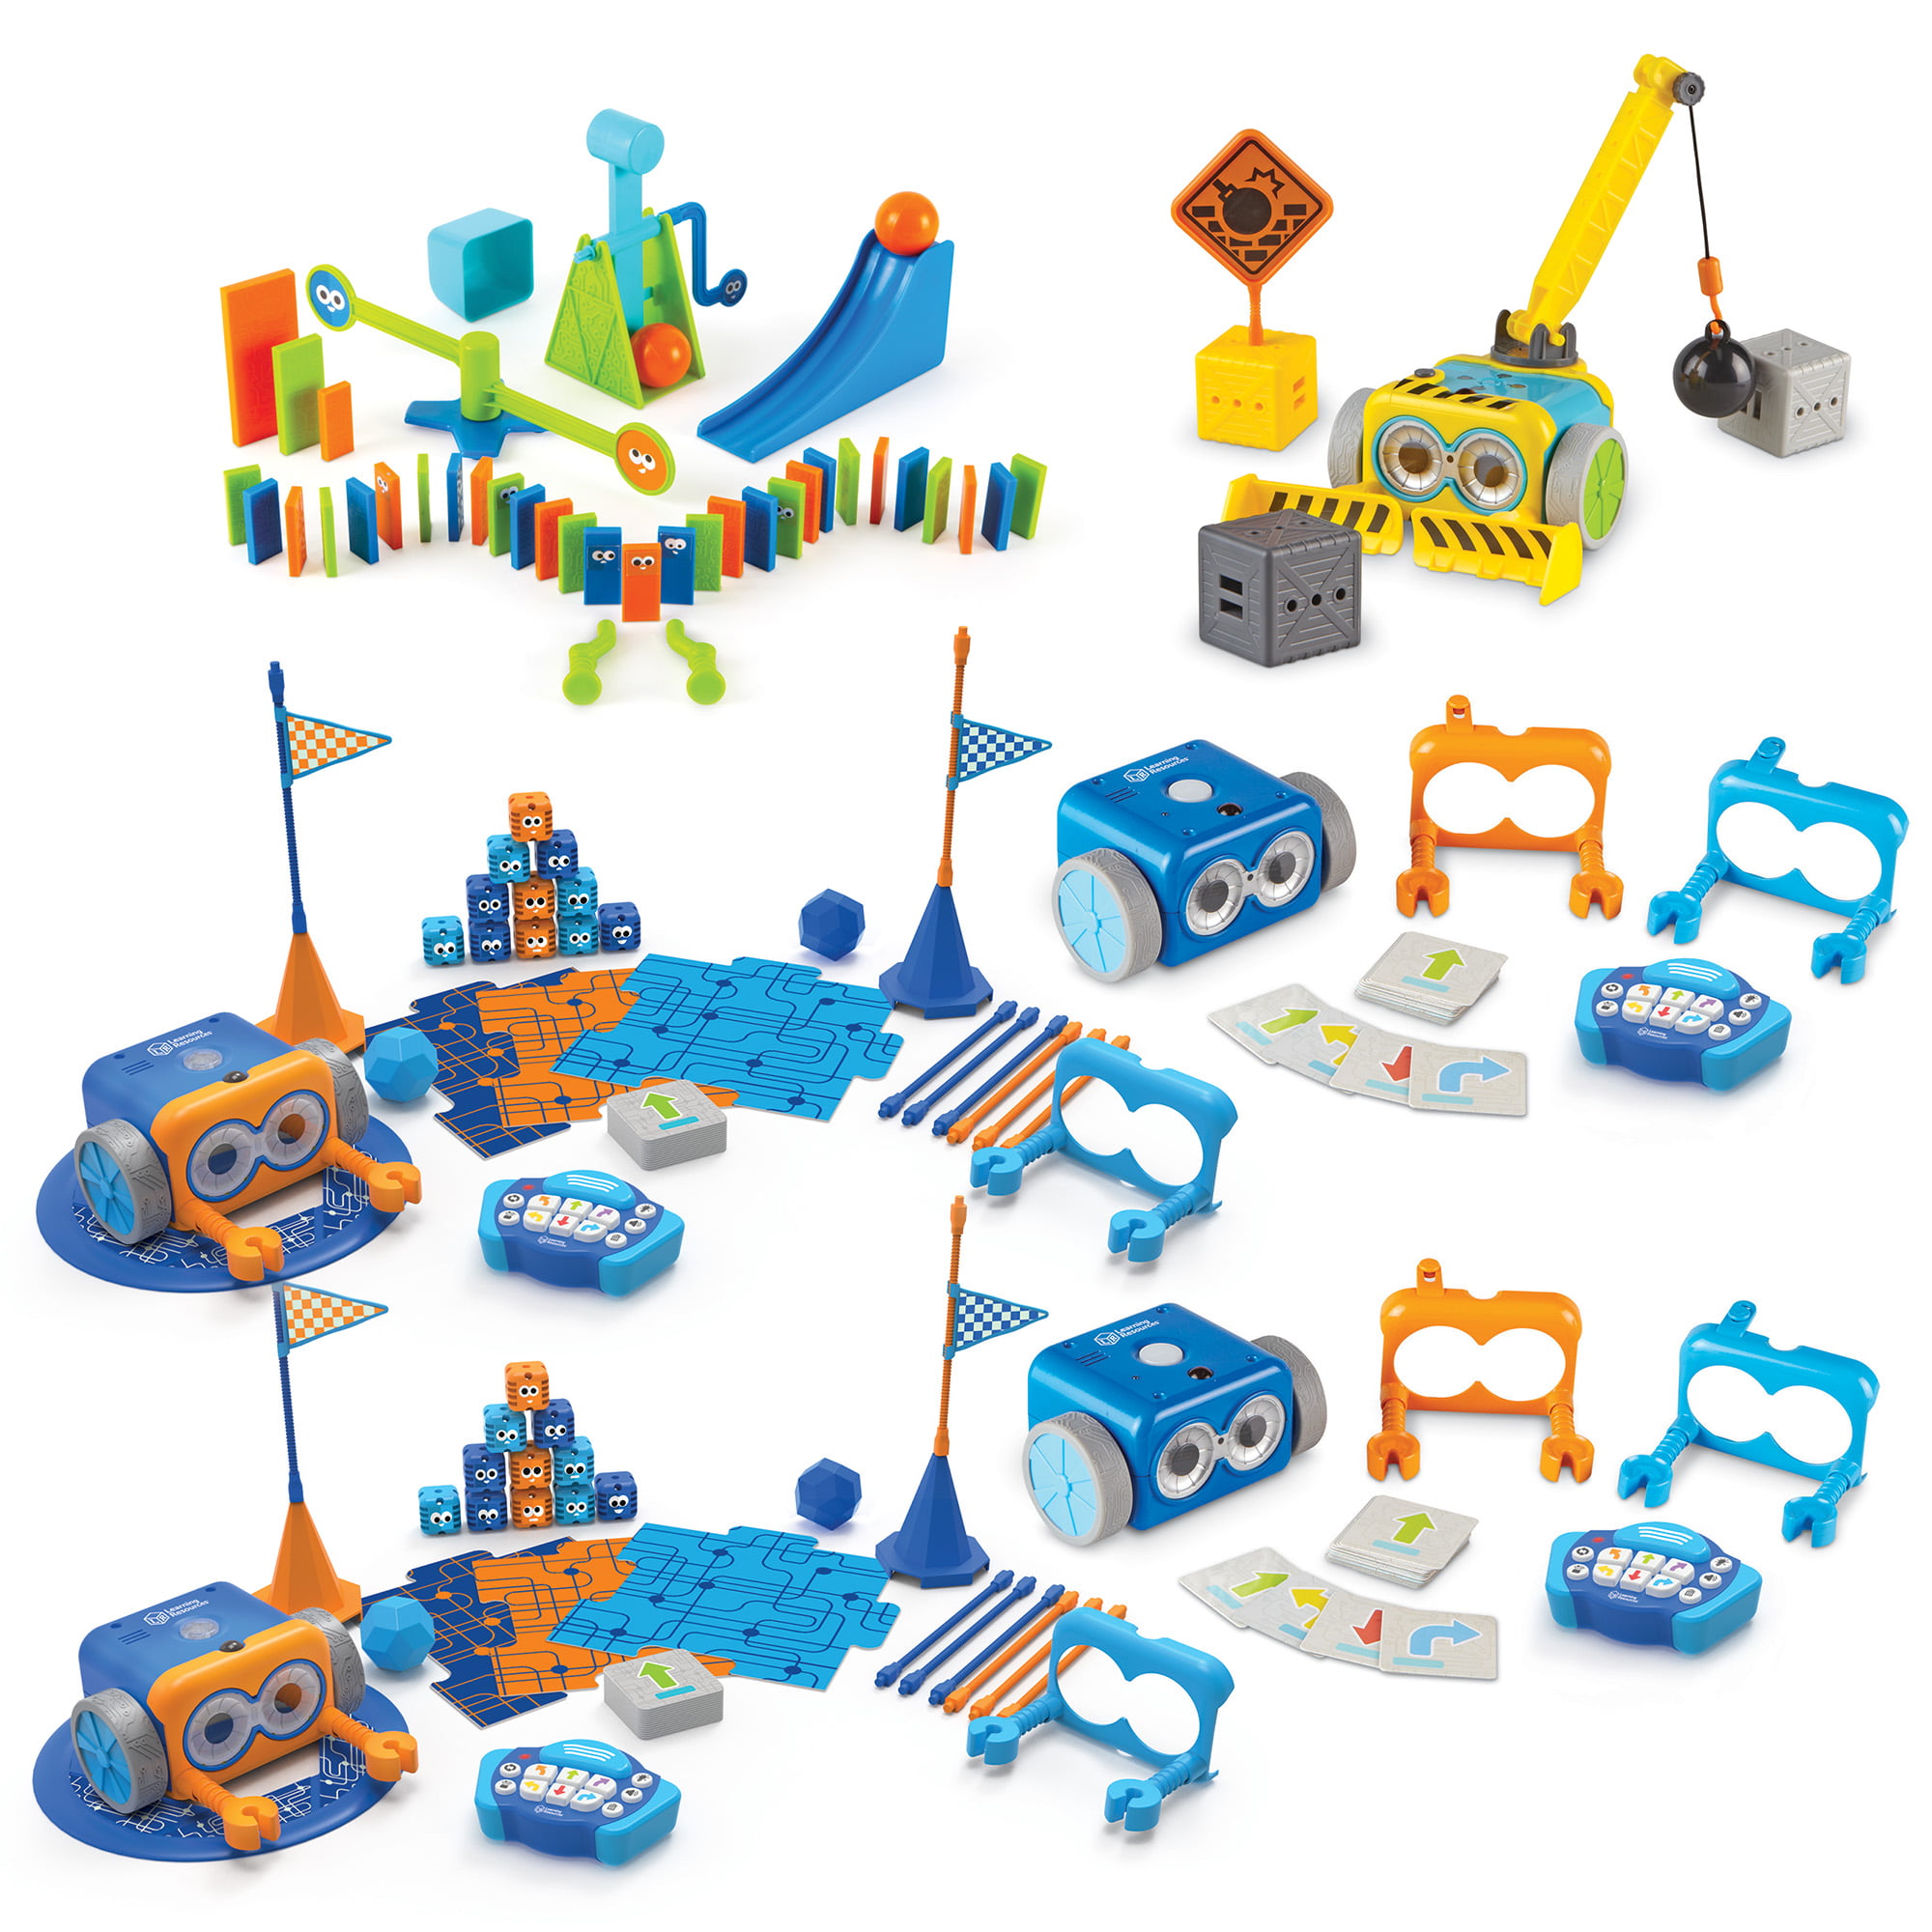 Learning Resources Botley the Coding Robot 2.0 - 46 pieces, Ages 5+ Coding  Robot for Kids, STEM Toys, Programming for Kids, Electronic Learning for